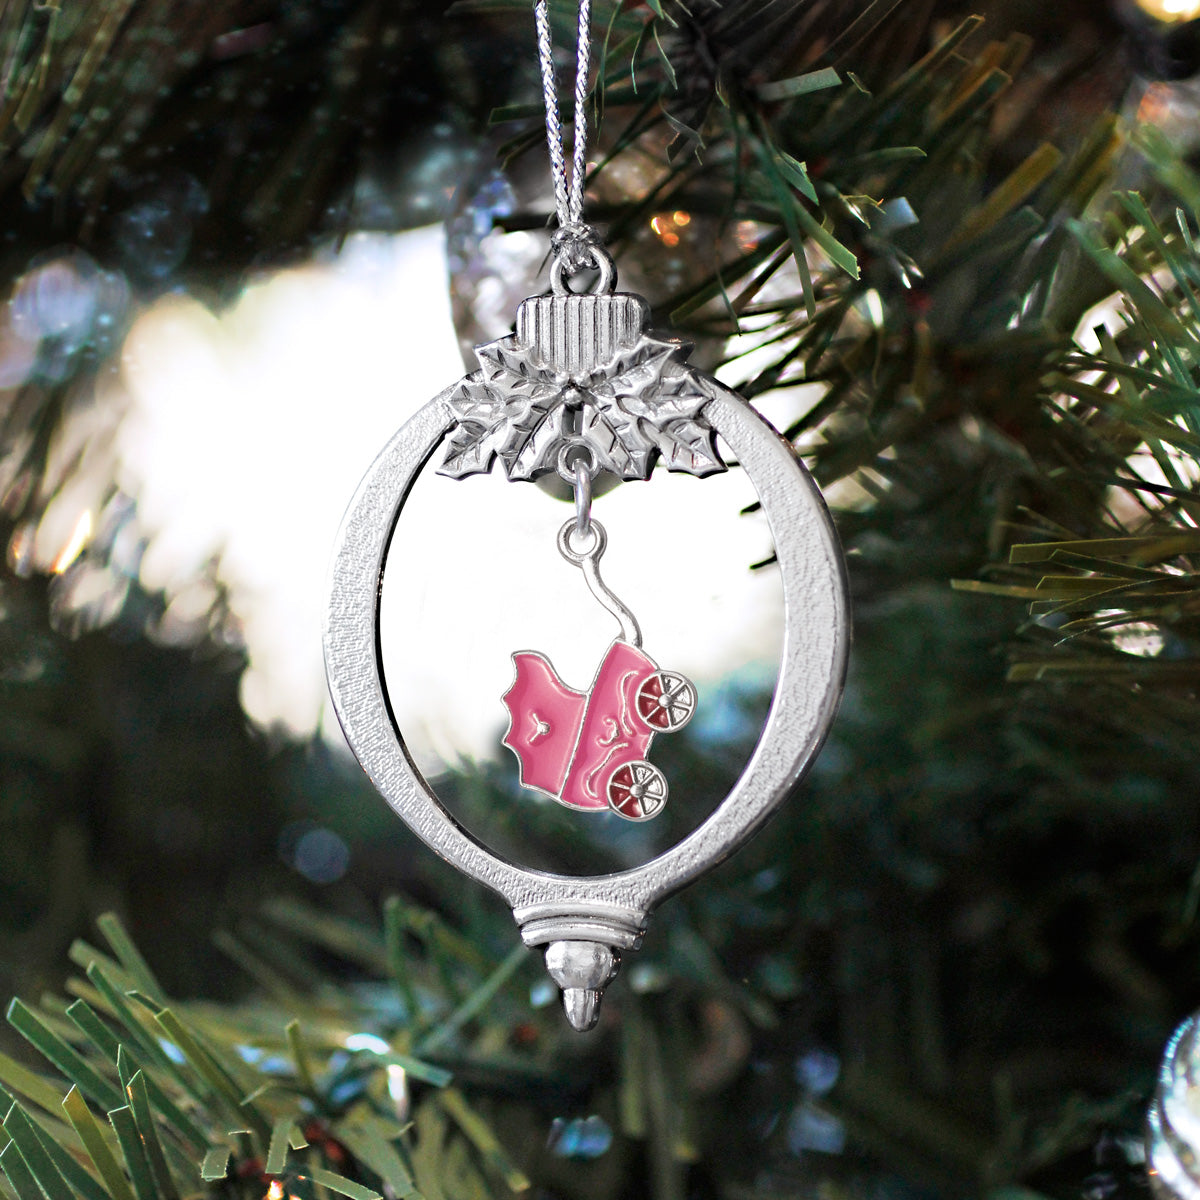 Pink Stroller Charm Christmas / Holiday Ornament